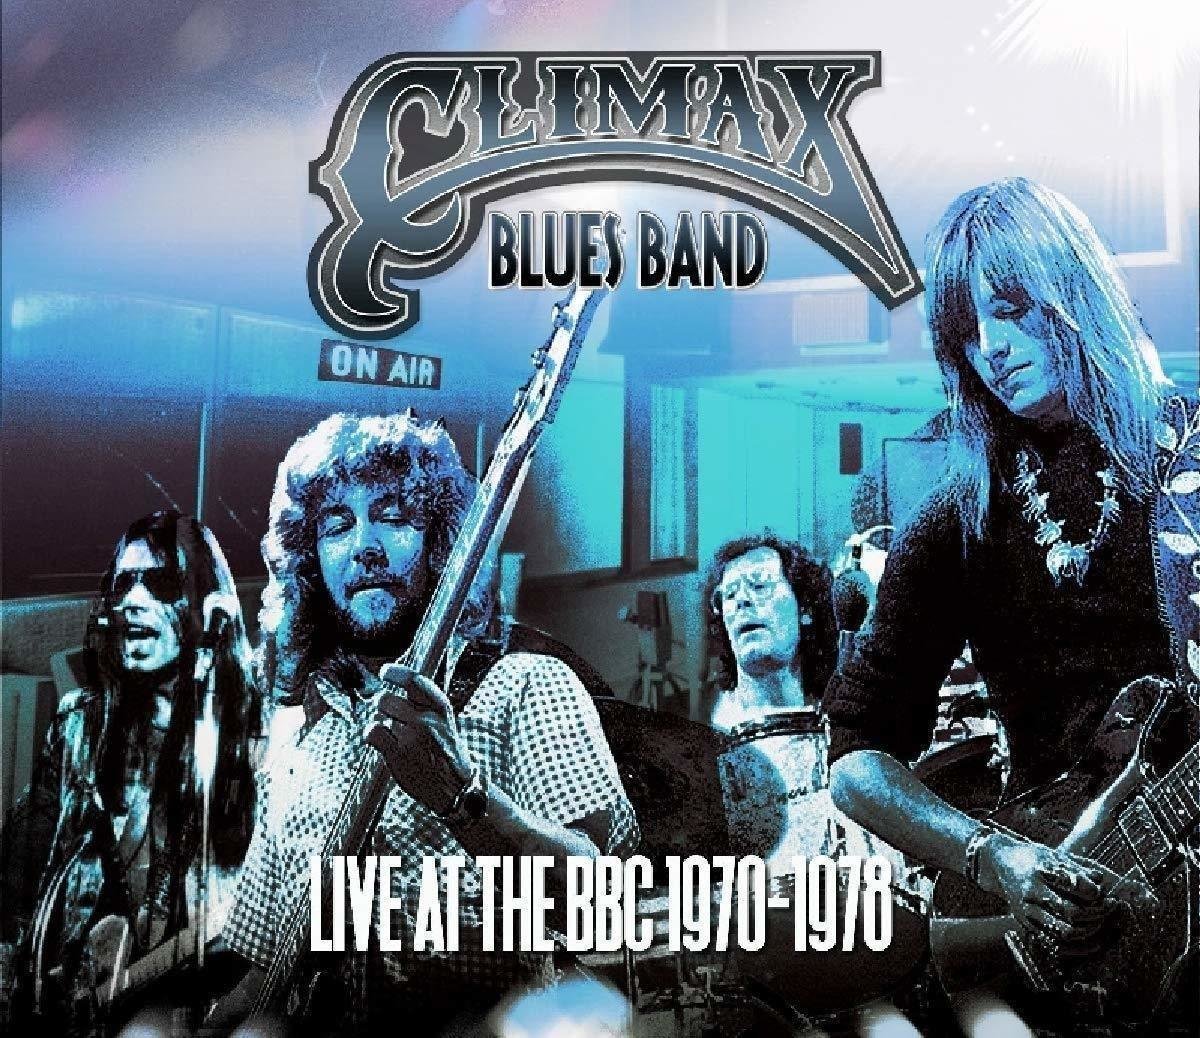 Climax Blues Band - Live At The BBC (1970-1978) (Remastered) (2 LP) Climax Blues Band